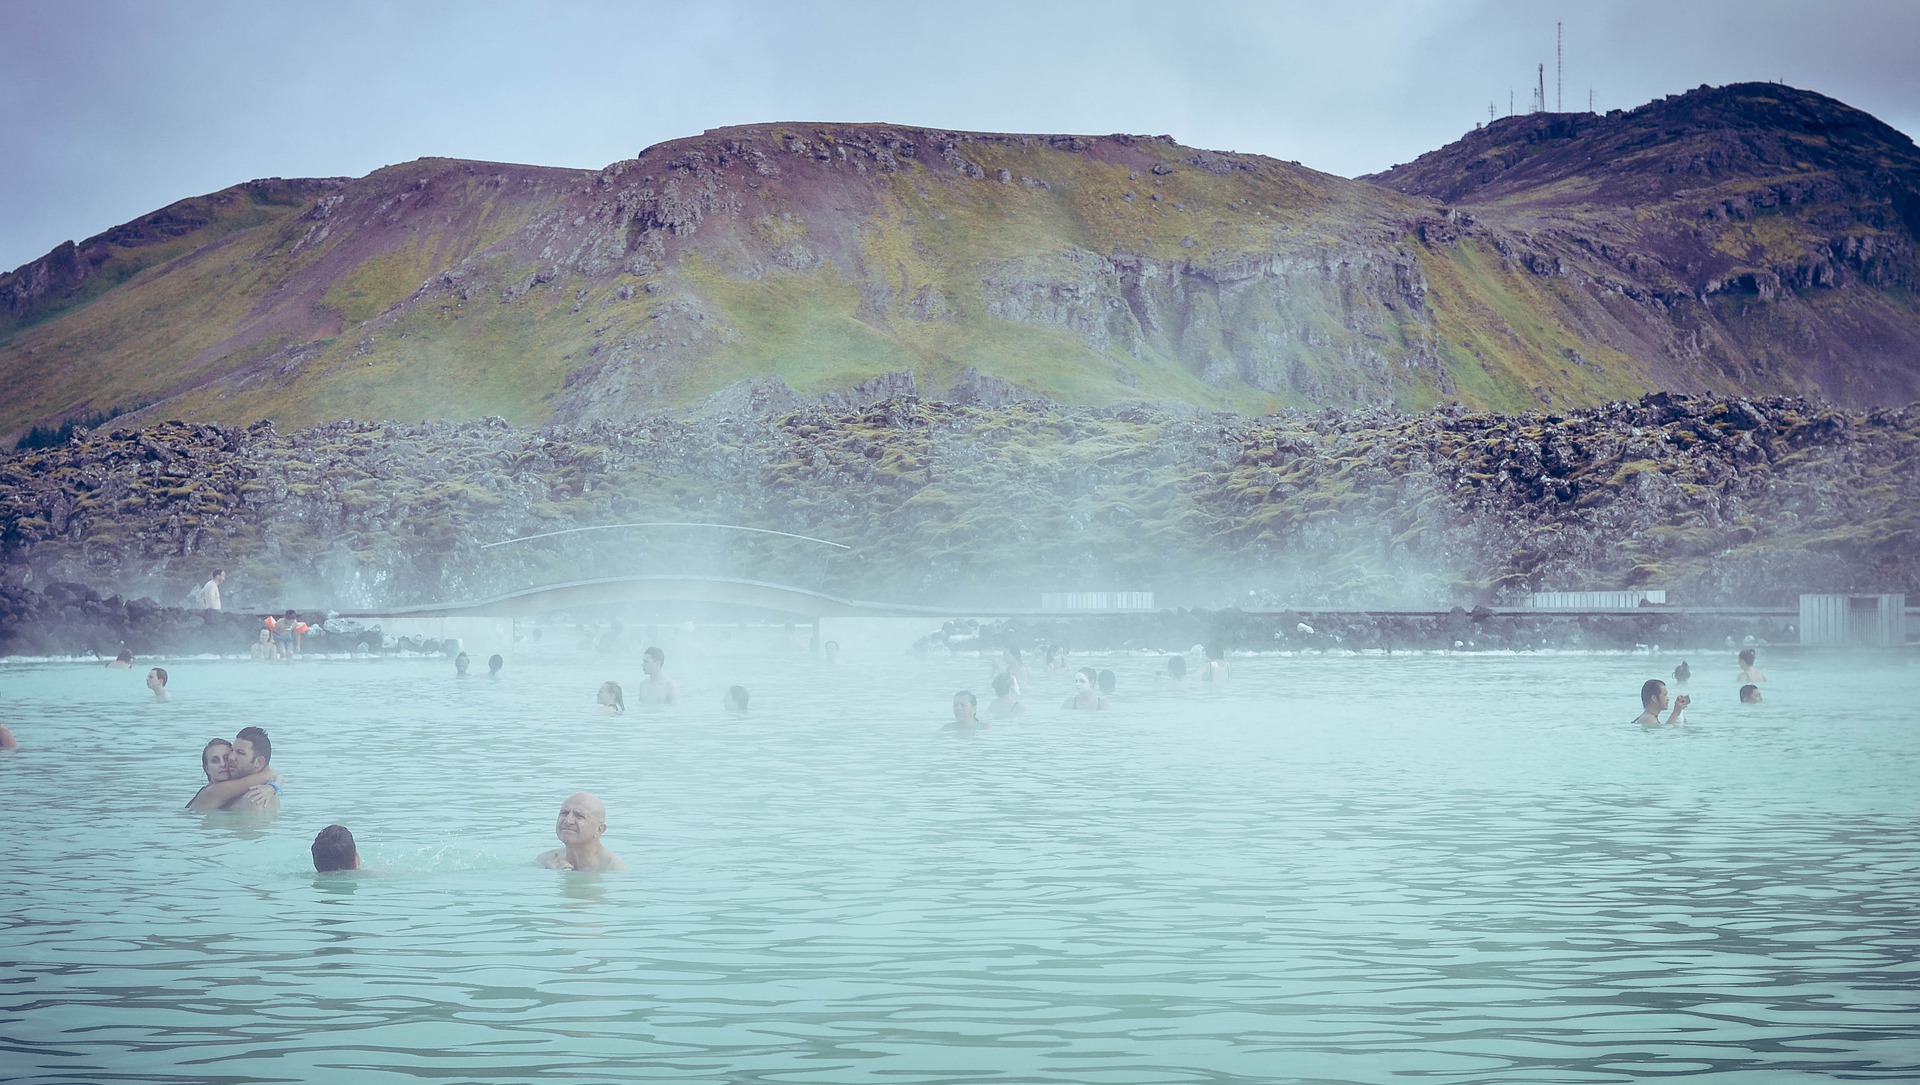 blue lagoon in iceland, steam and people bathing in the hot water